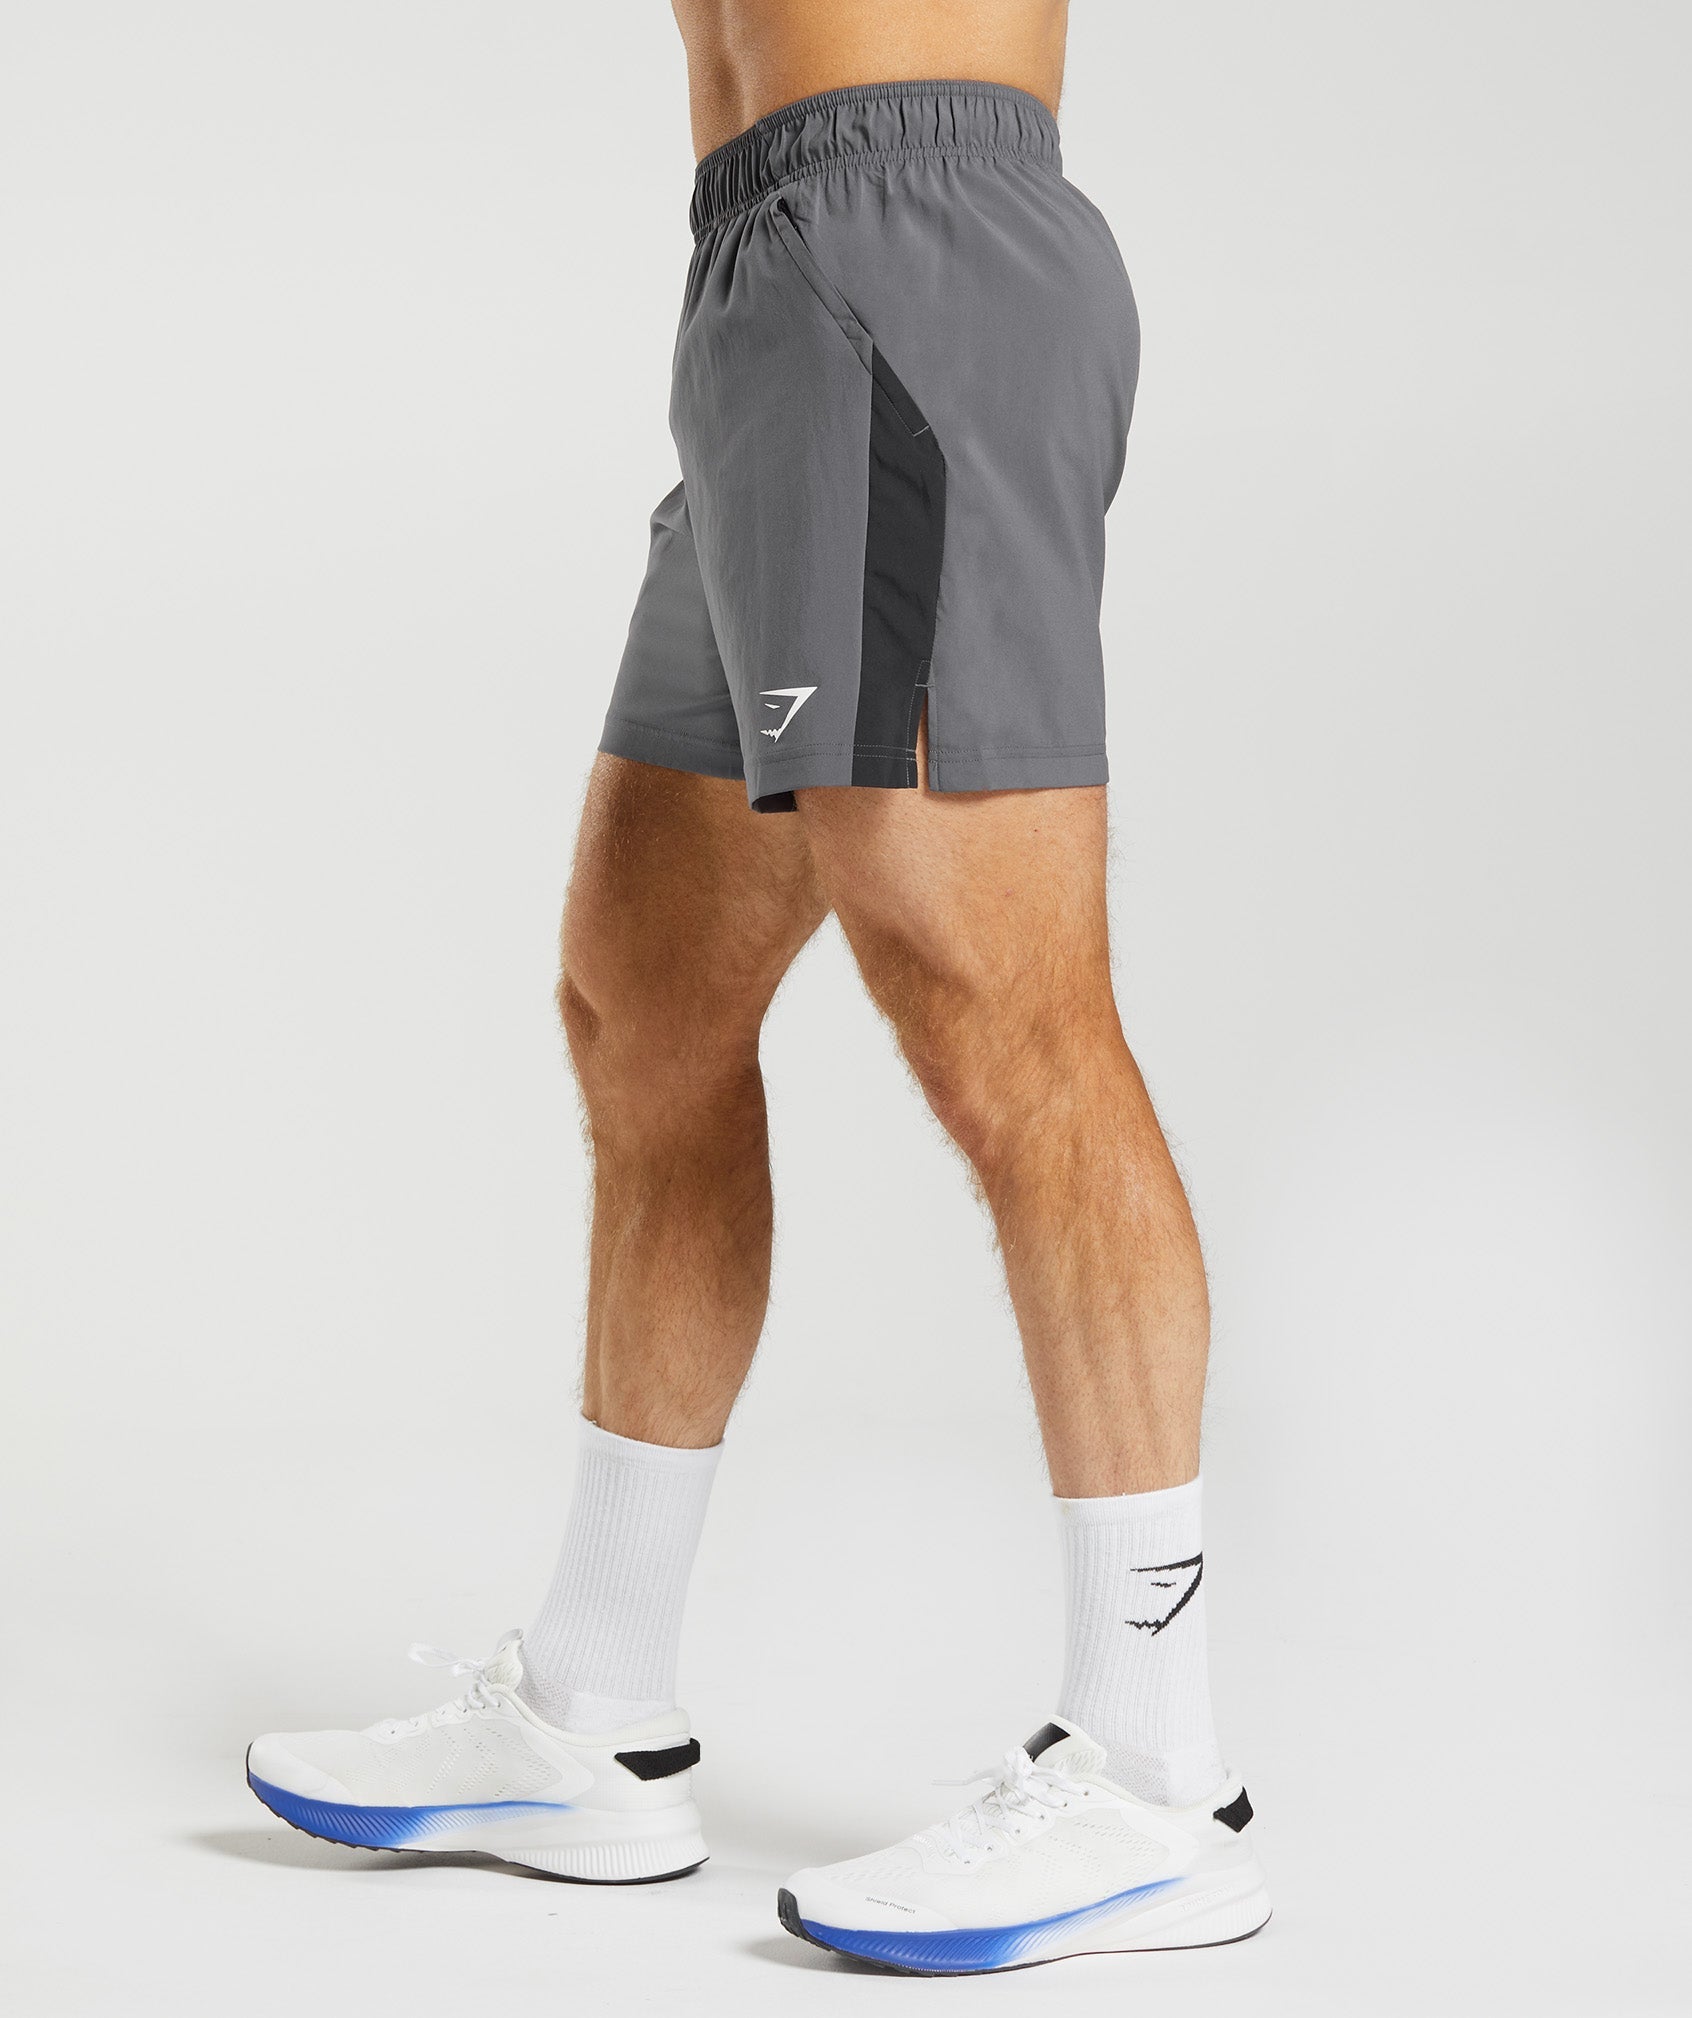 Sport Shorts in Silhouette Grey/Black - view 3